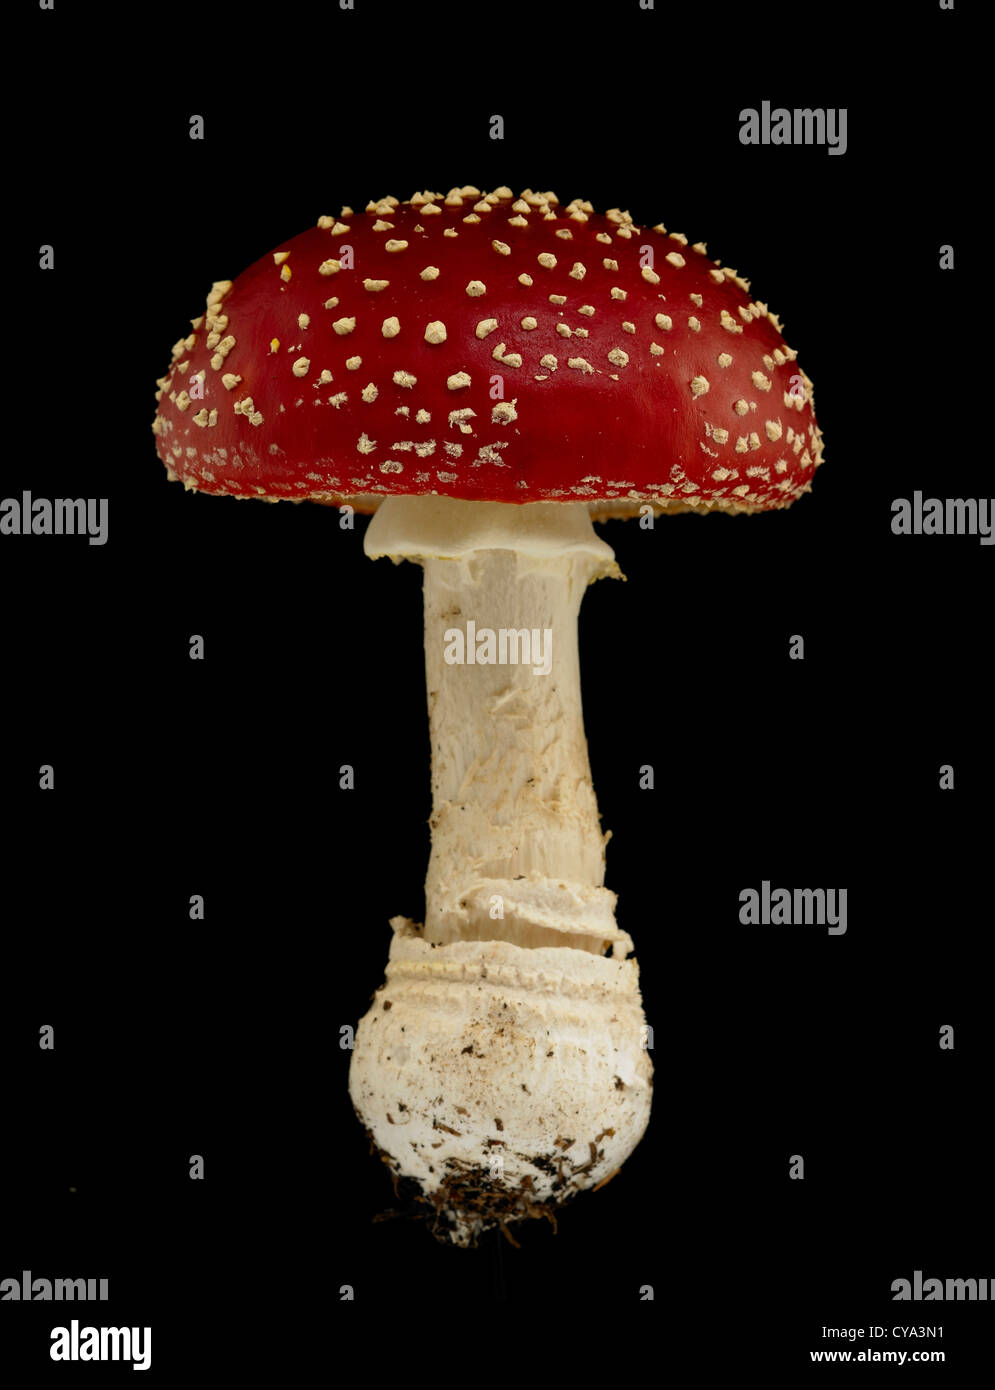 Amanita muscaria, commonly known as the fly agaric or fly amanita. Red and white spotted poisonous fungus Stock Photo